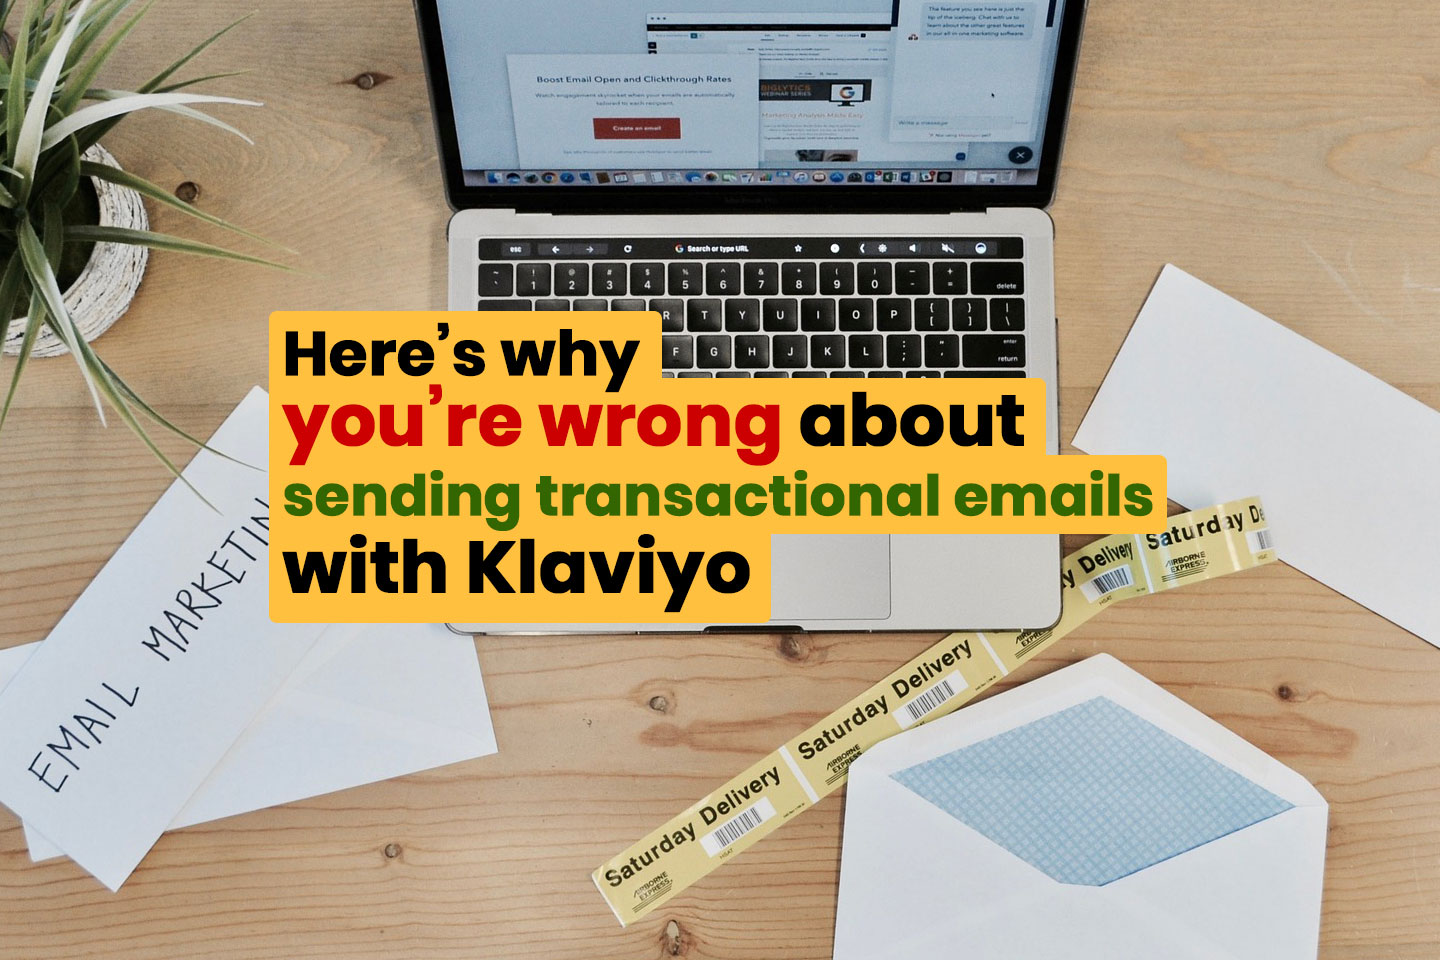 Why sending transactional emails with klaviyo maybe wrong